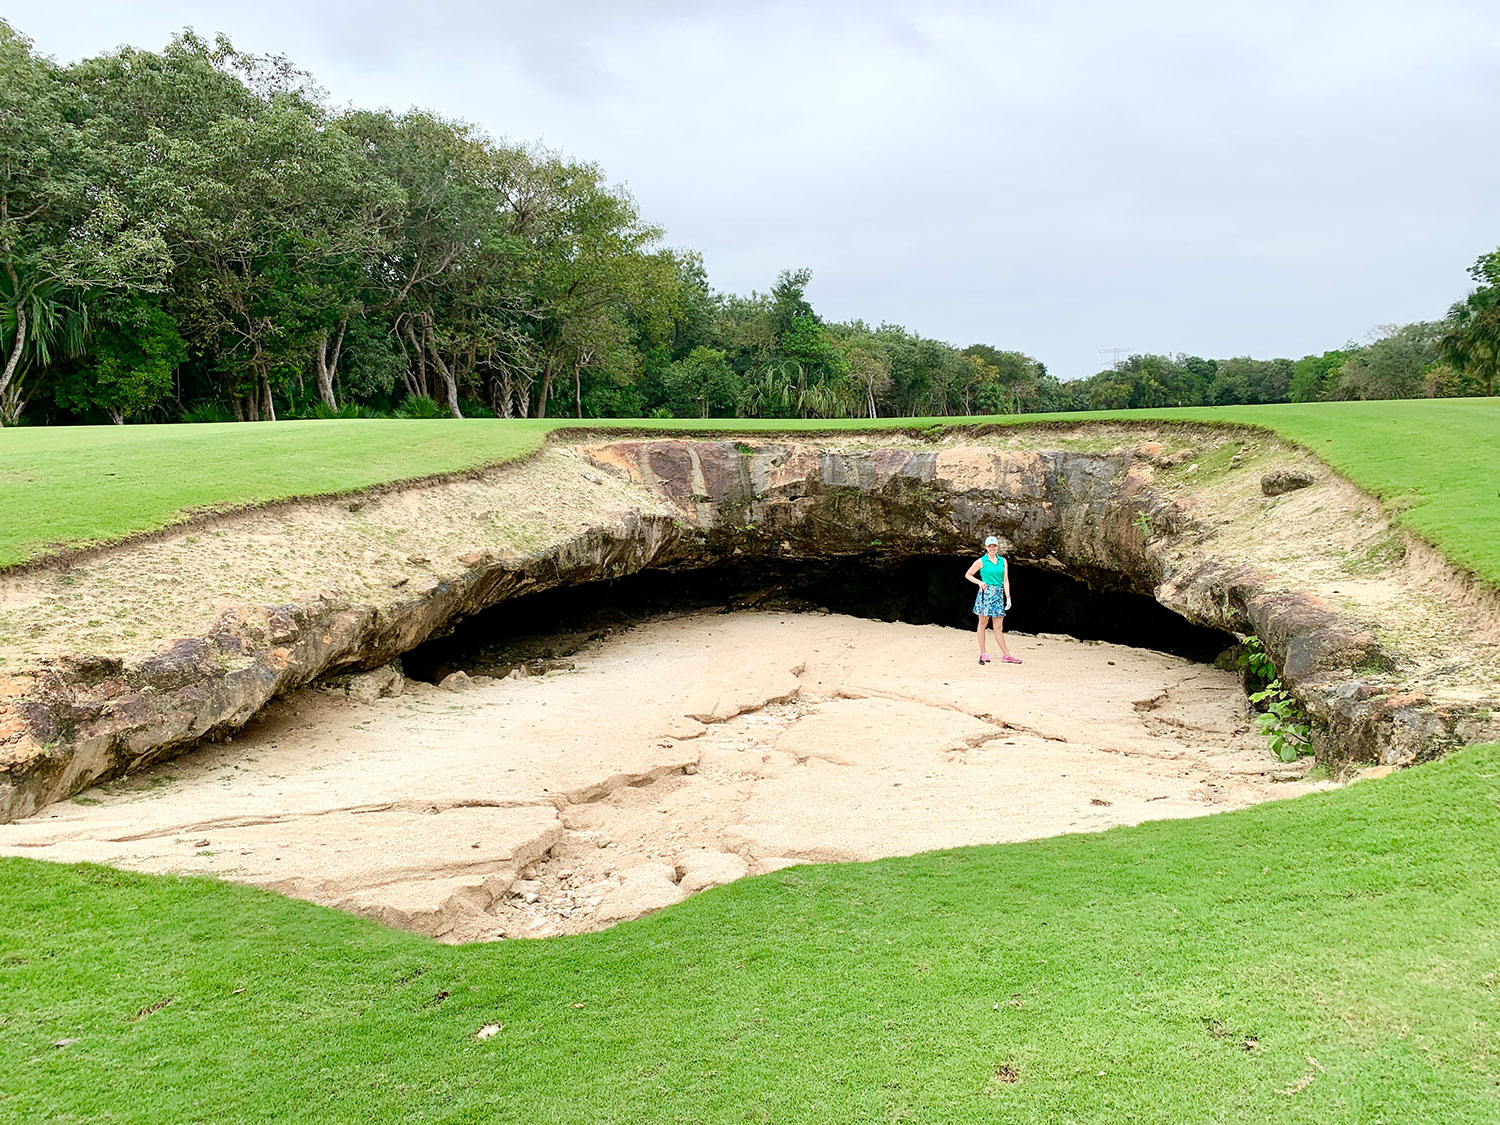 El Camaleon's iconic landmark is a cenote sand trap in the middle of the fairway on hole 7.